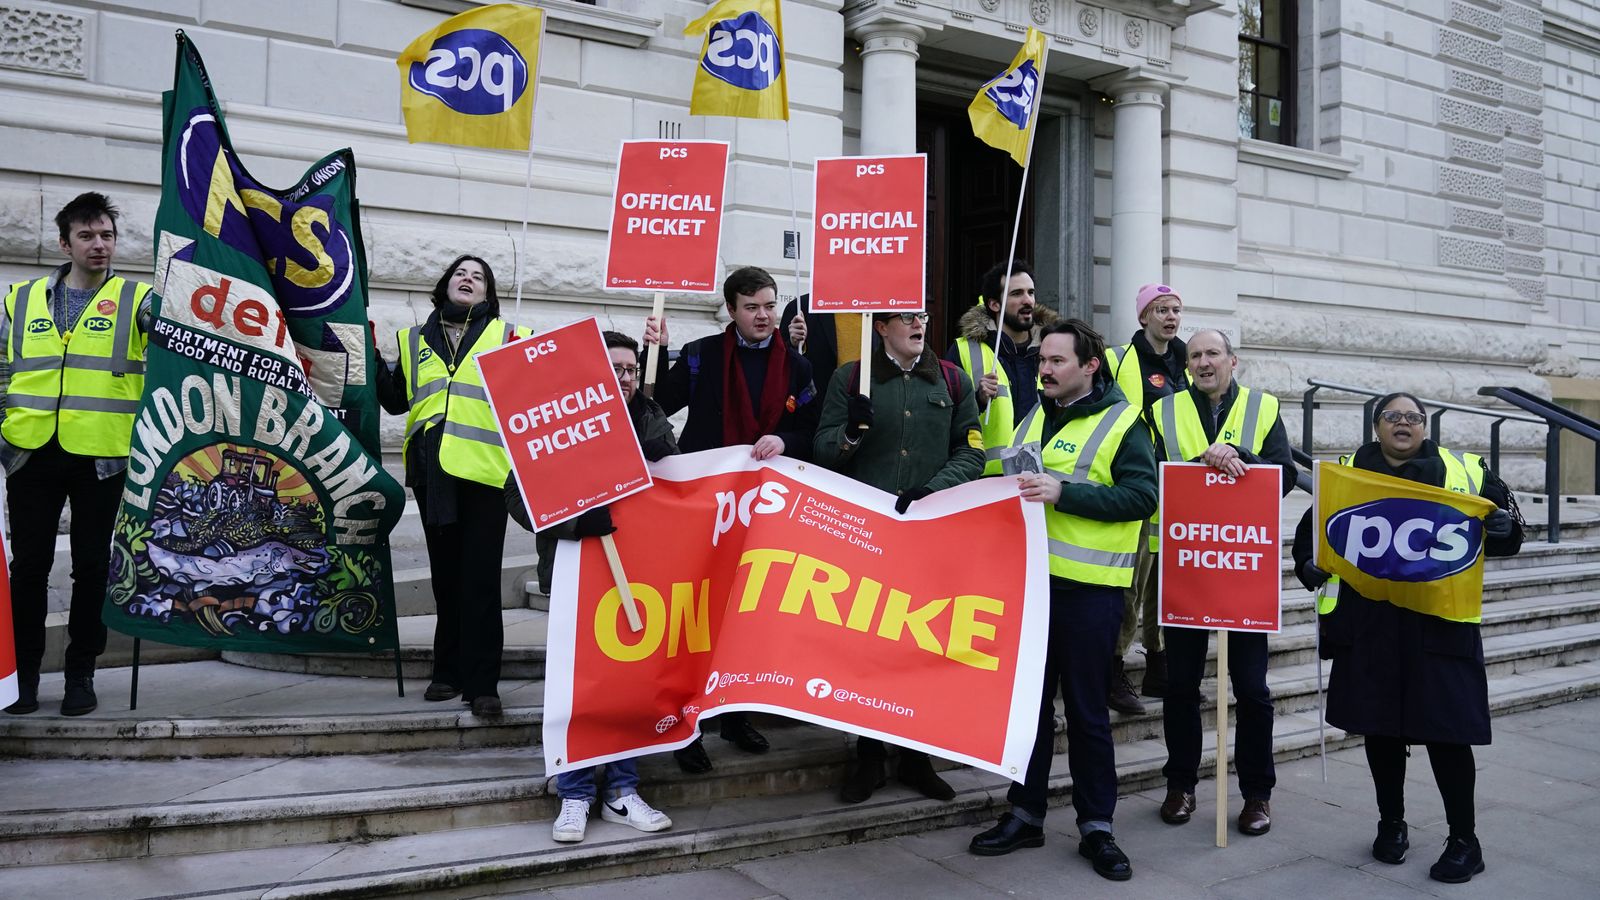 Future industrial action 'will be even bigger' if ministers do not act, union boss warns - as hundreds of thousands of workers walk out 